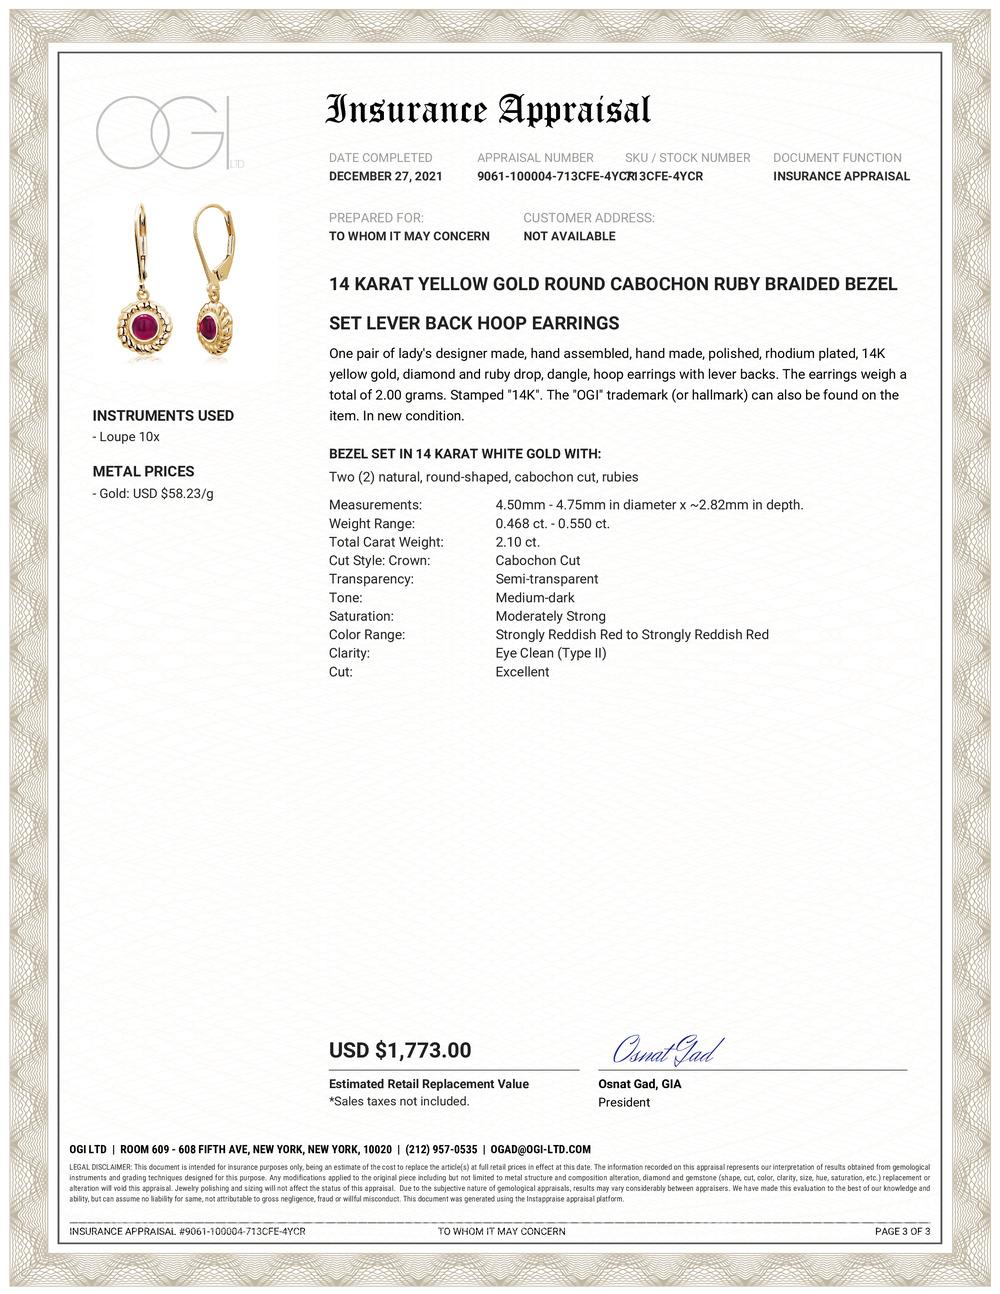 14 karats yellow gold braided bezel set cabochon ruby lever back earrings
Cabochon rubies weighing 2.10 carat
Ruby measuring 4.5 millimeters
Ruby hue tone color is of rose red
Earrings are hanging off a yellow gold lever backs
Handmade in the